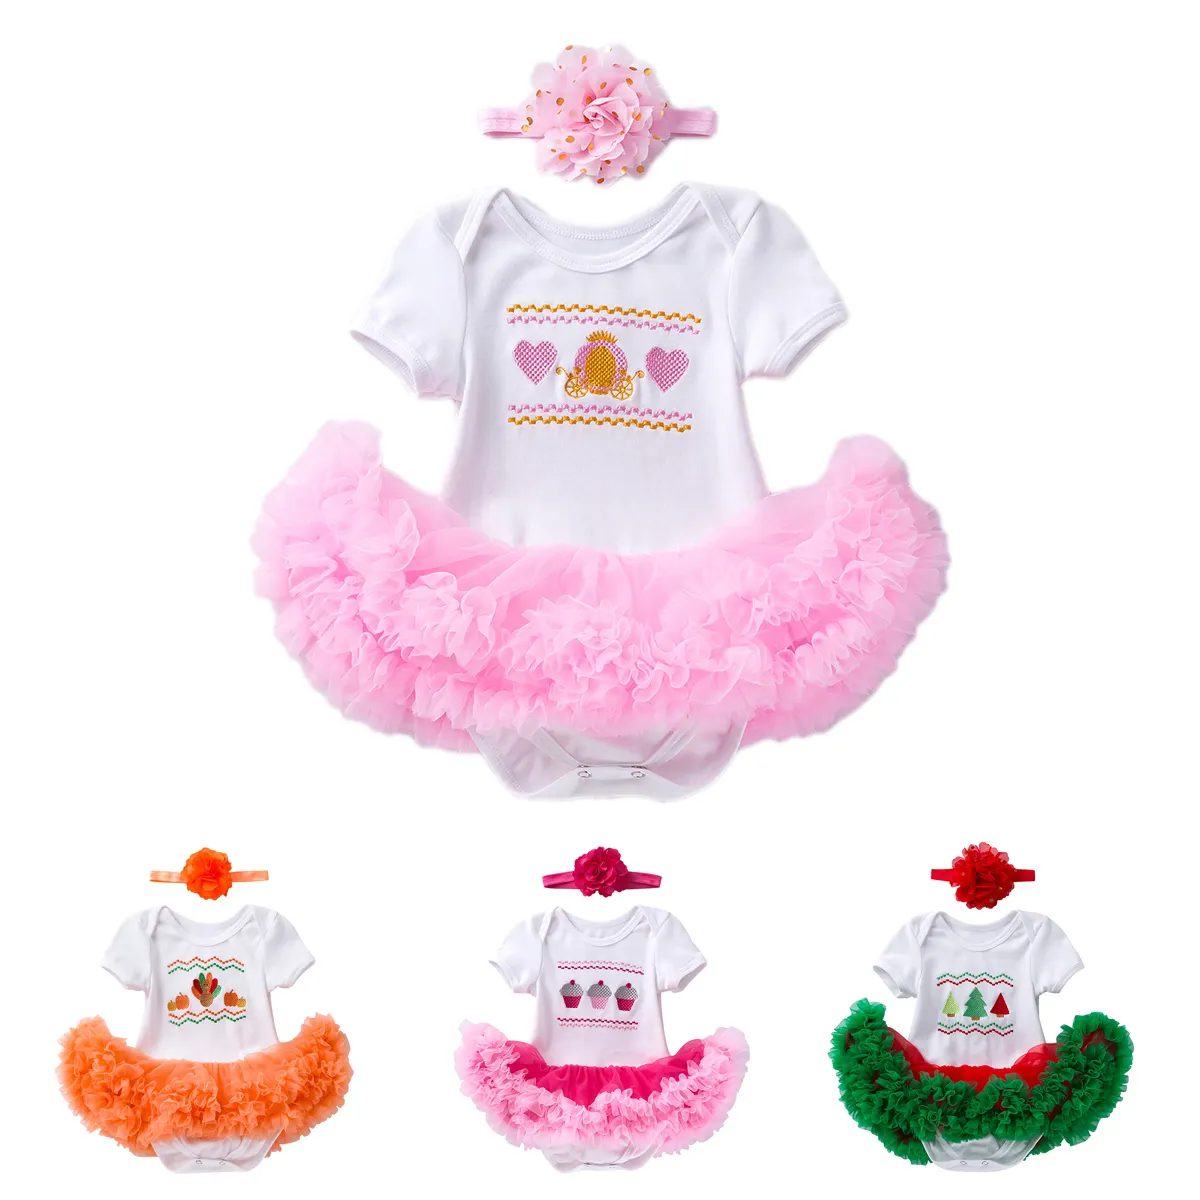 Baby Romper Dress Set Wholesale Baby Girl Cotton Rompers Set With Headband Baby Clothes Newborn Short Sleeve Summer Clothing